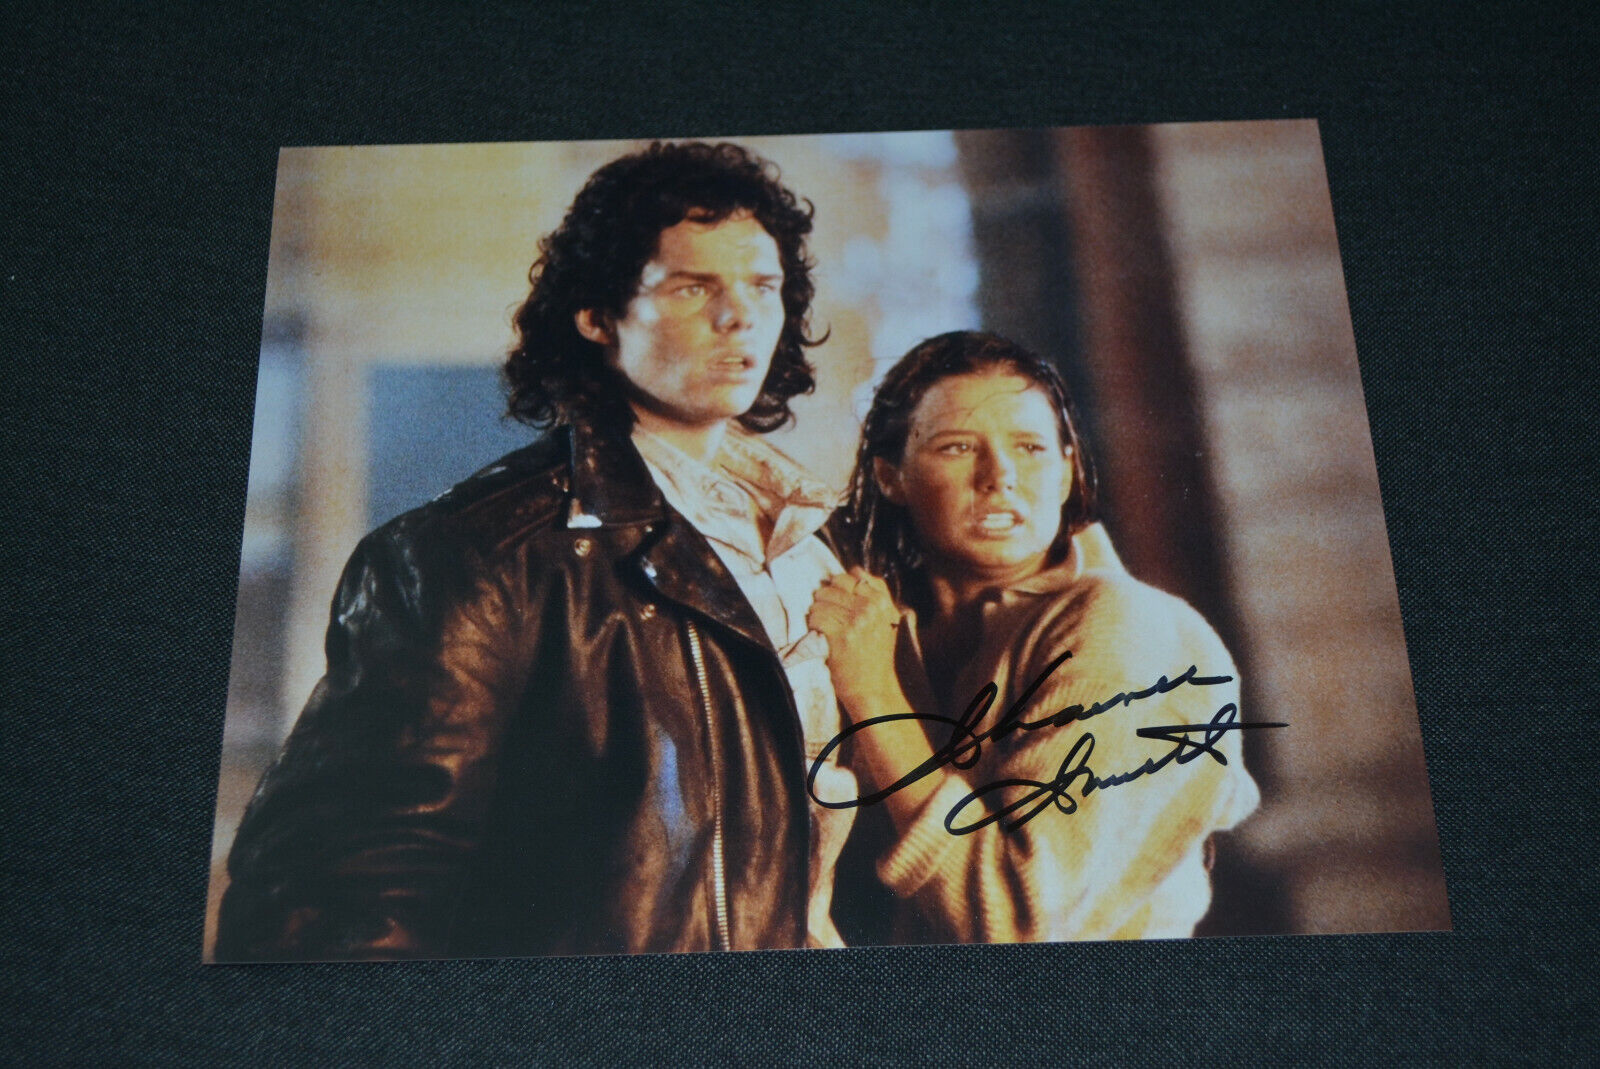 SHAWNEE SMITH signed autograph In Person 8x10 20x25 cm THE BLOB